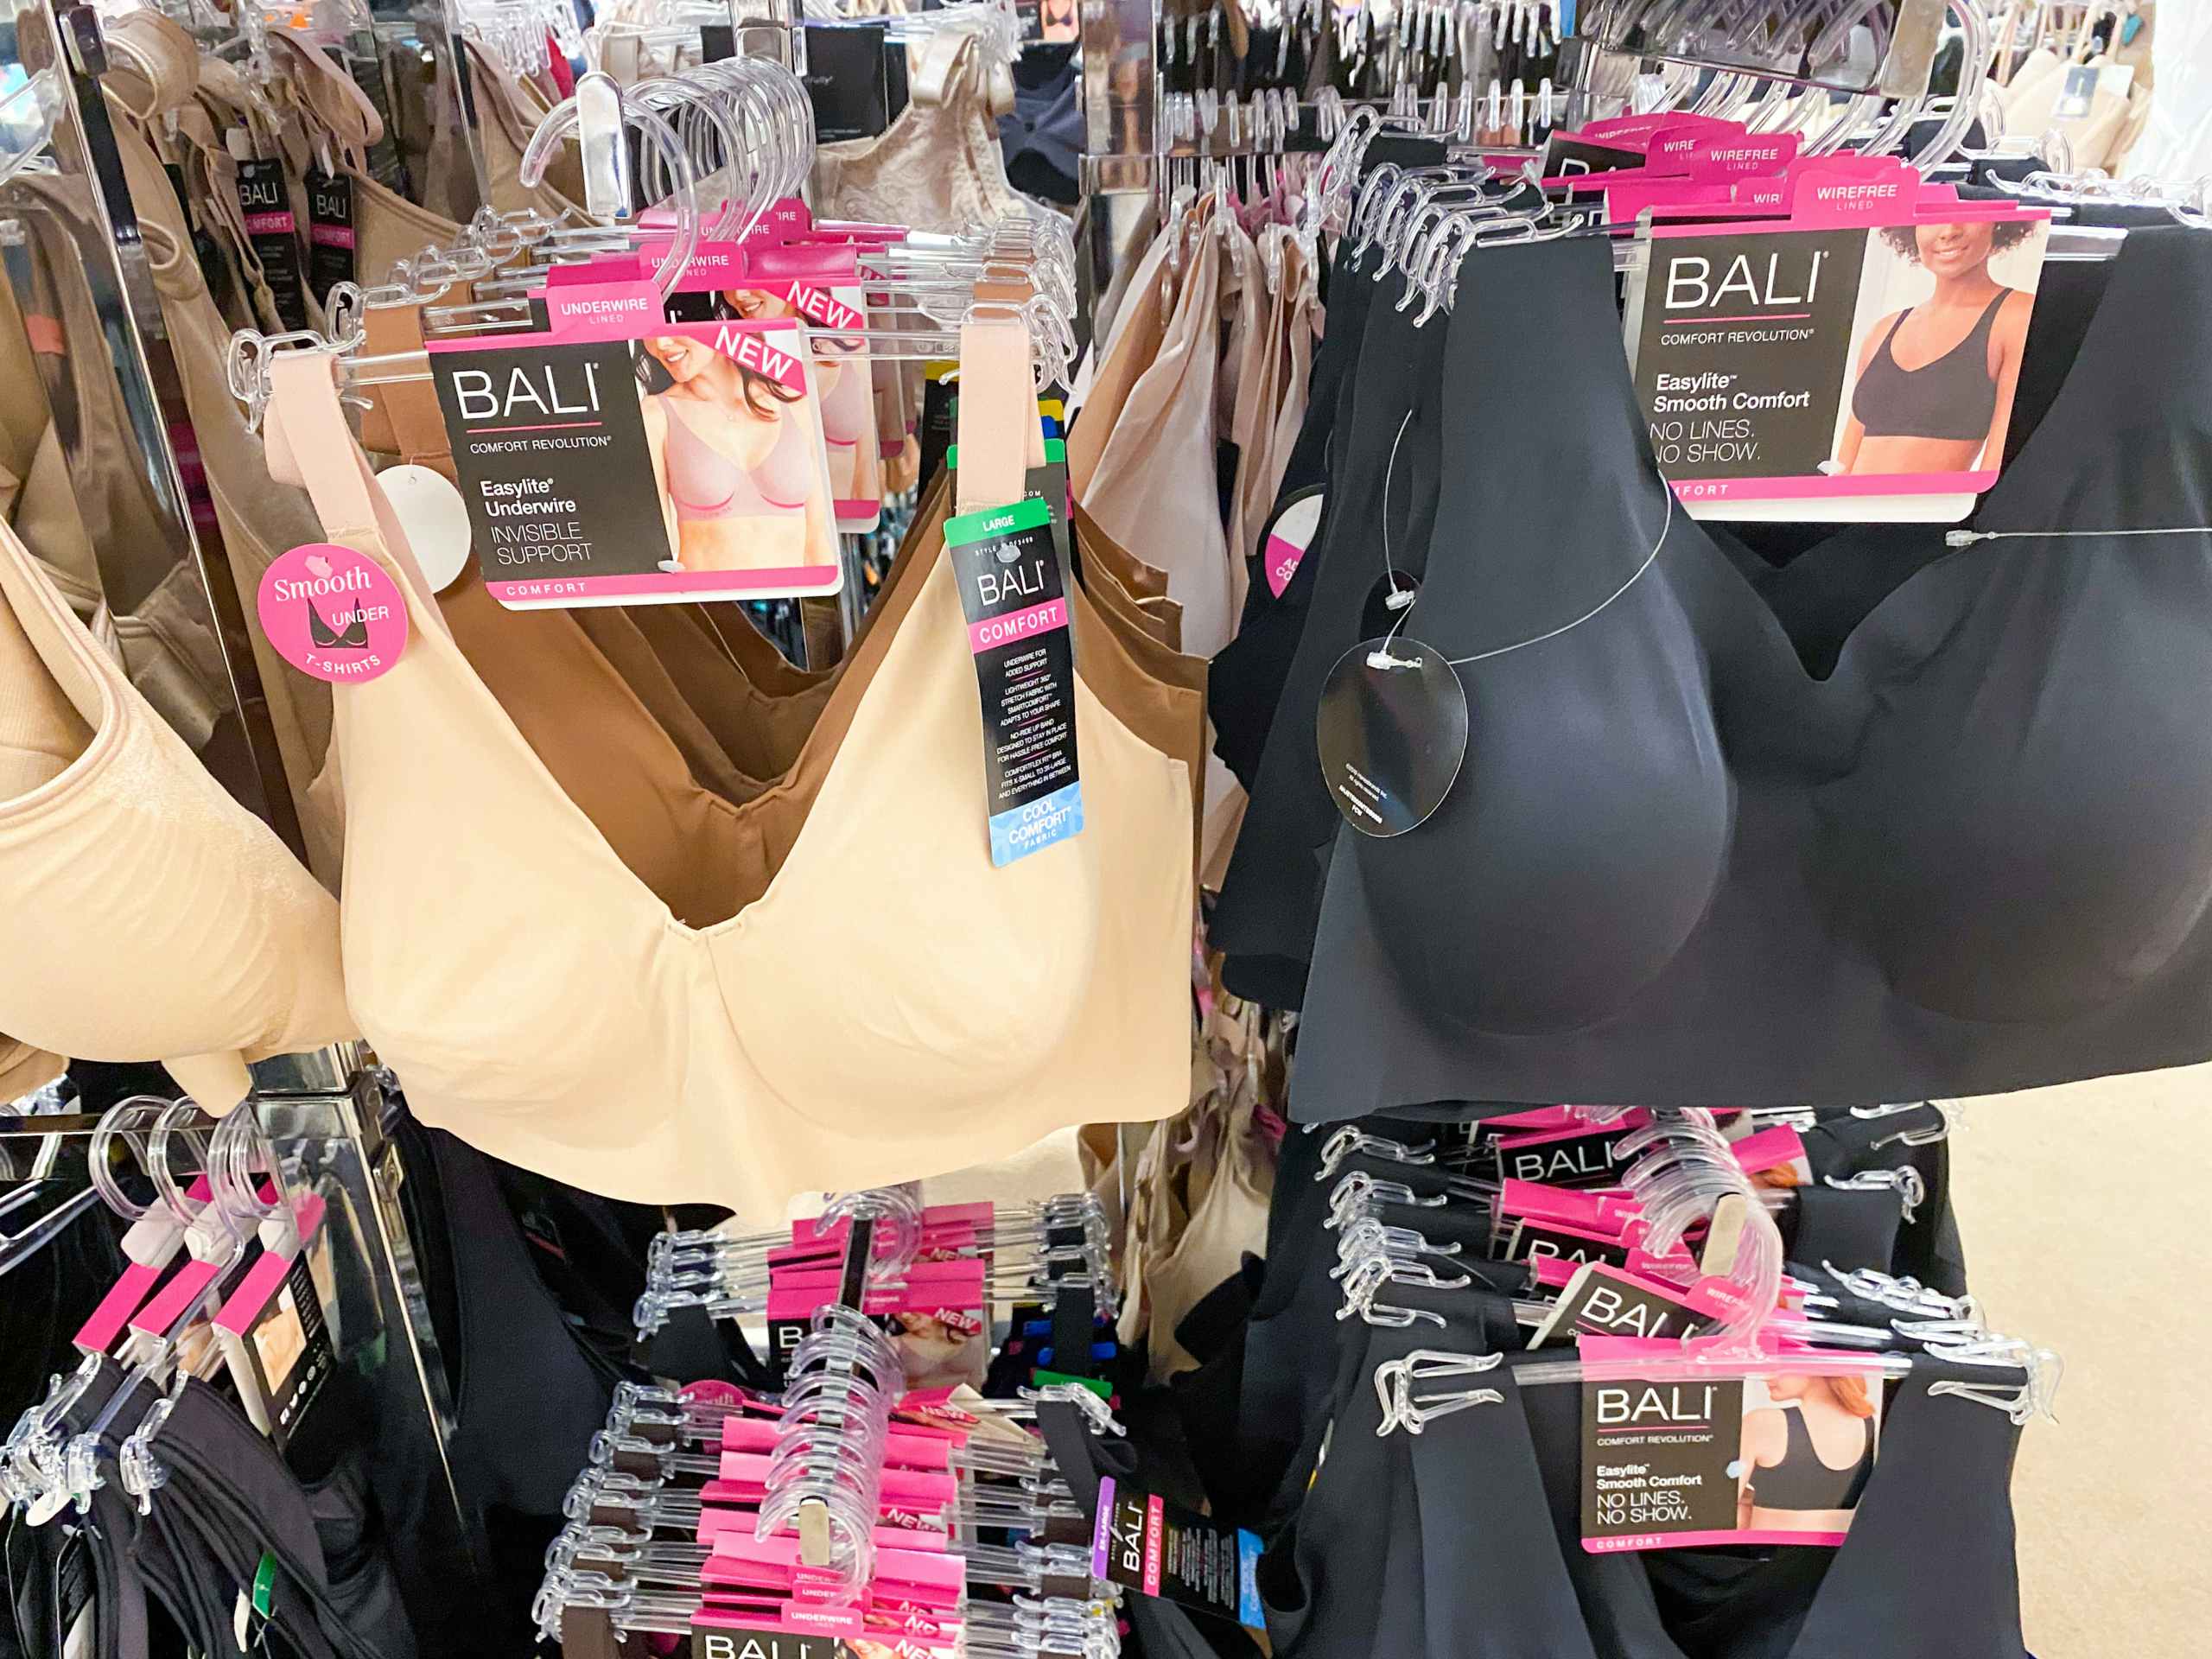 a display of Bali bras on hangers in the bra section of macys